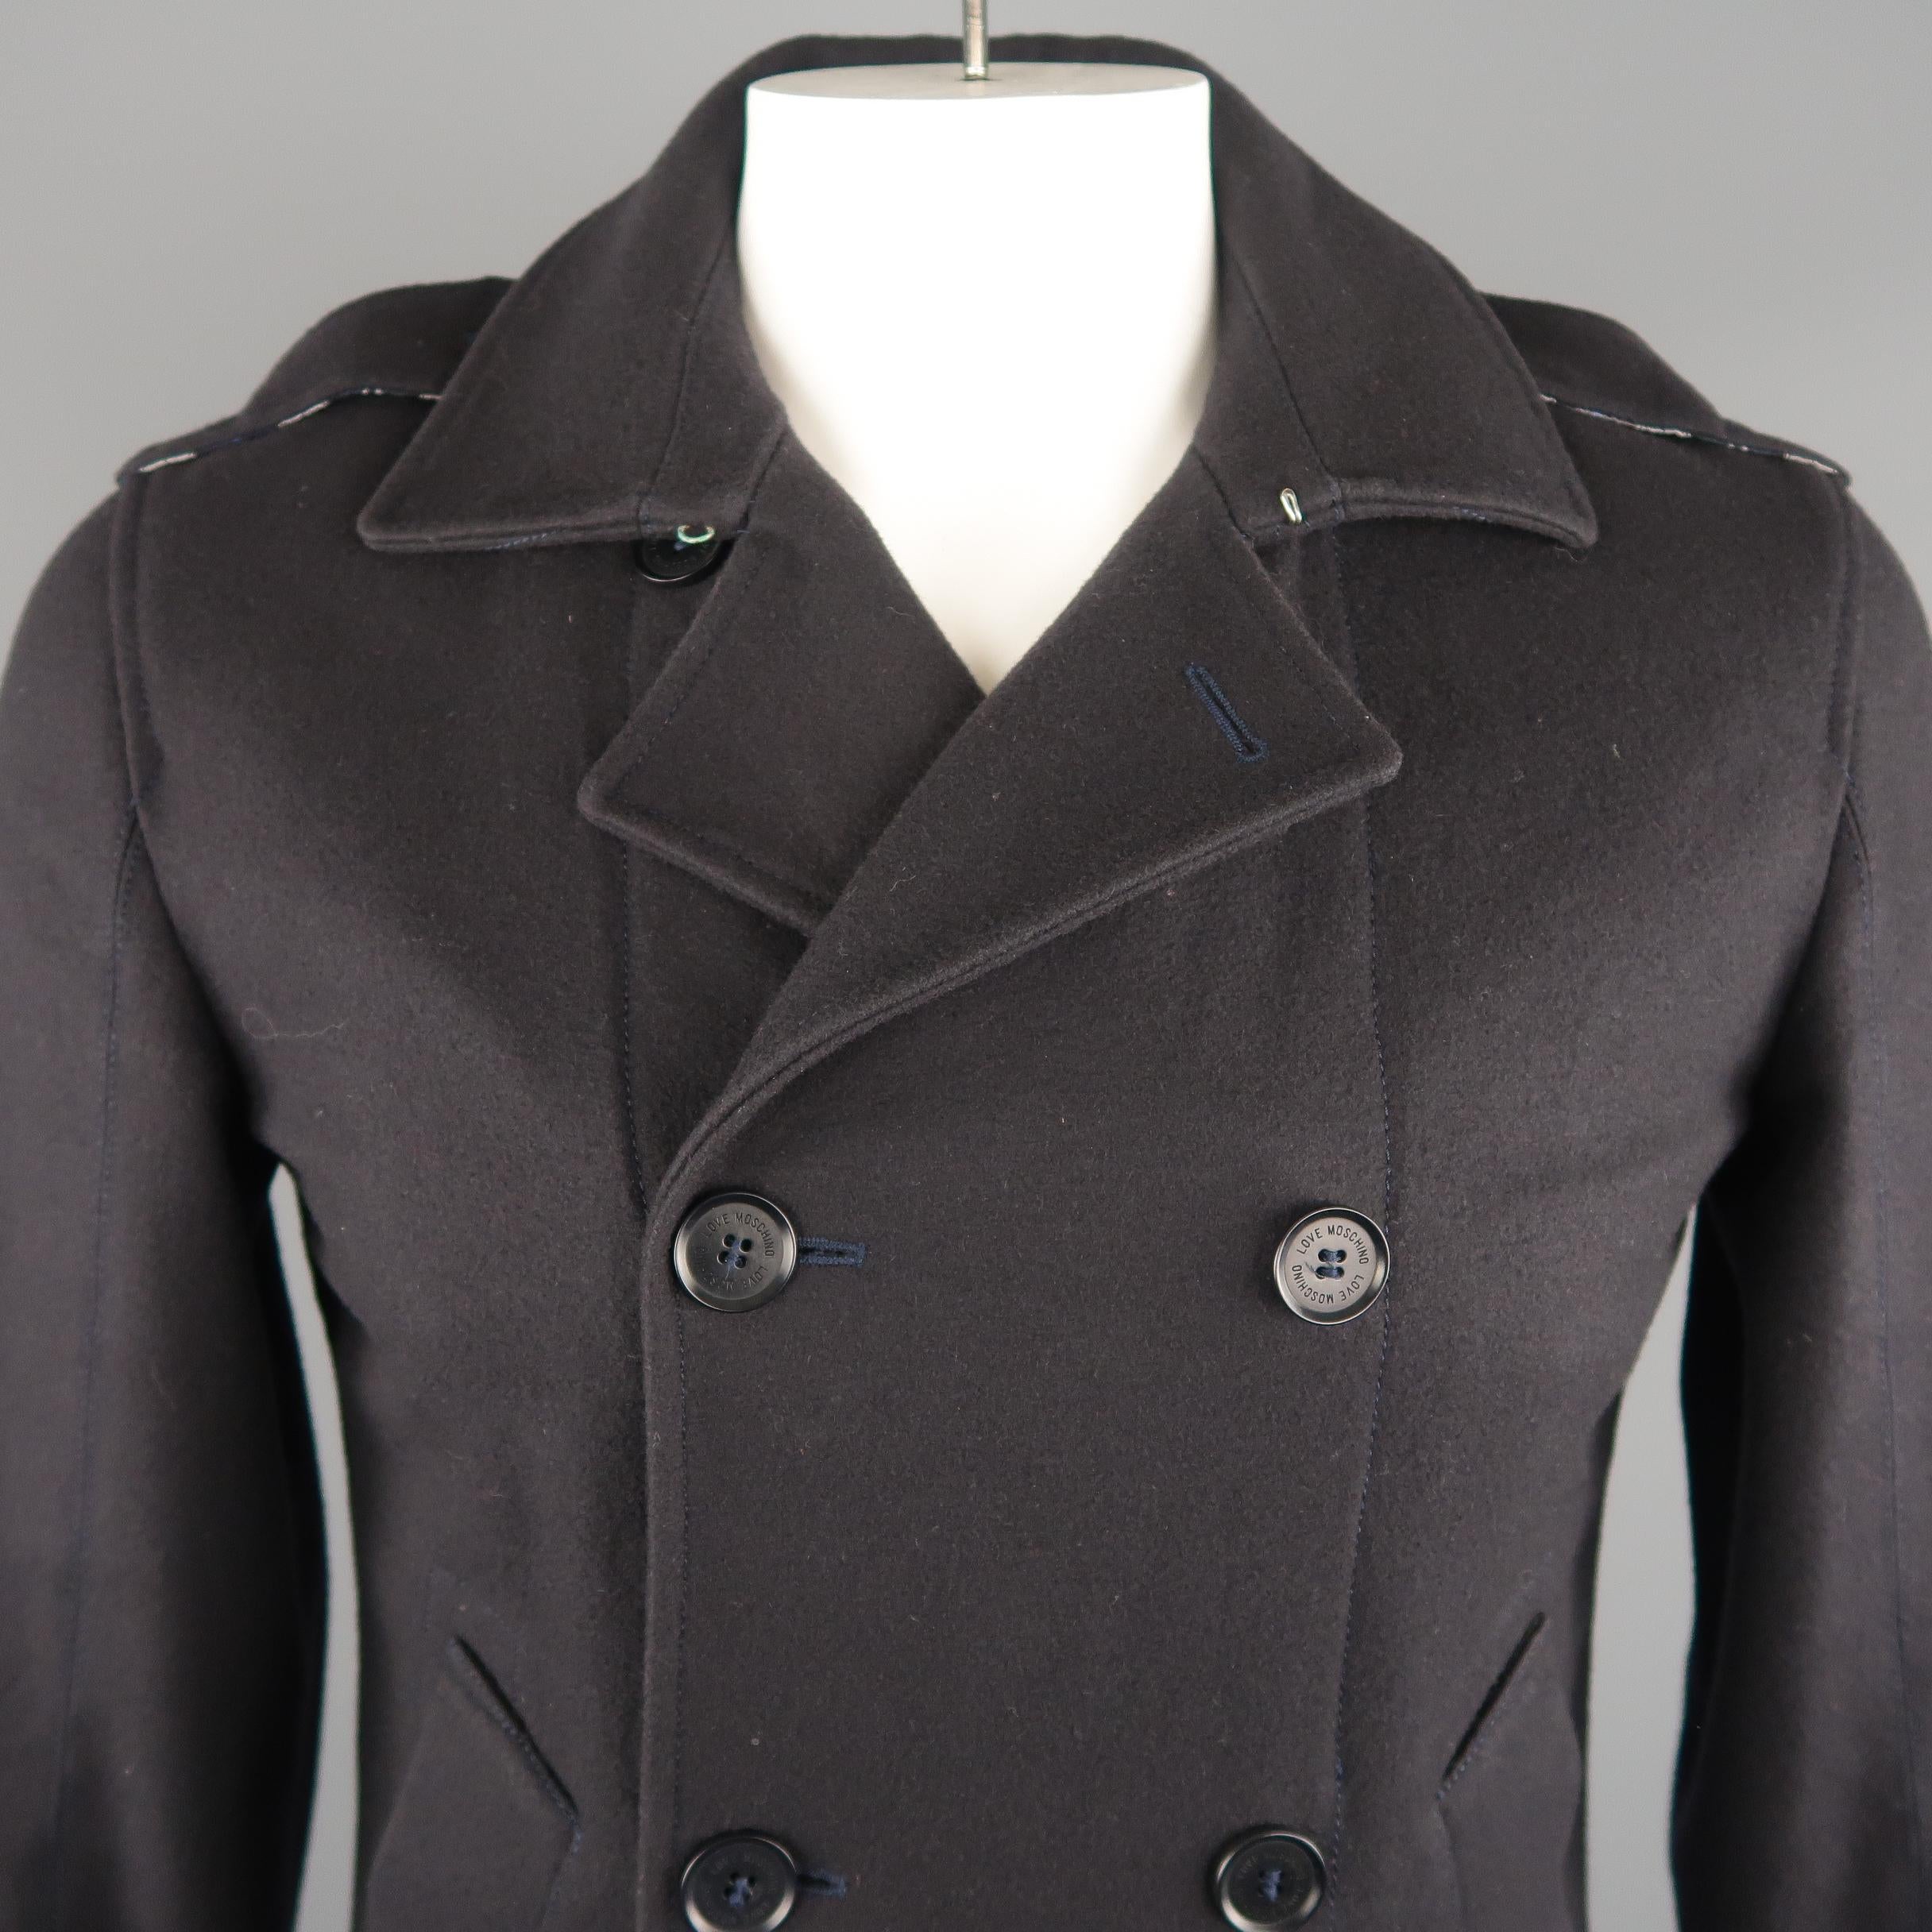 LOVE MOSCHINO peacoat comes in black tone in solid wool material, double breasted, with a slit pocket, shoulder and cuffs buttoned tabs.  Made in Italy.
 
Excellent Pre-Owned Condition.
Marked: 32
 
Measurements:
 
Shoulder: 17  in.
Chest: 43 